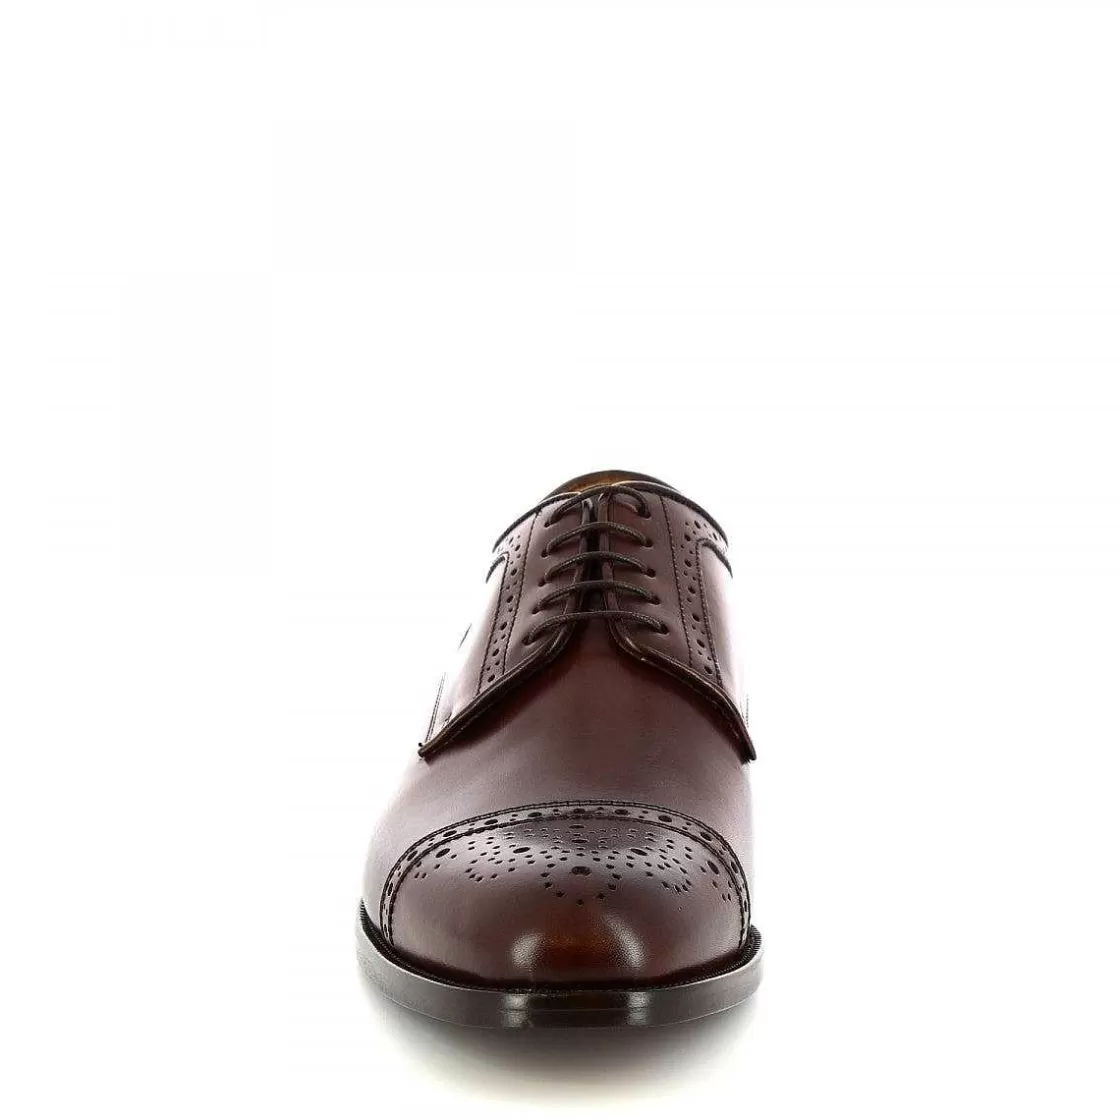 Leonardo Handmade Men'S Brogues Shoes In Chocolate Leather Calfskin With Tip Sale